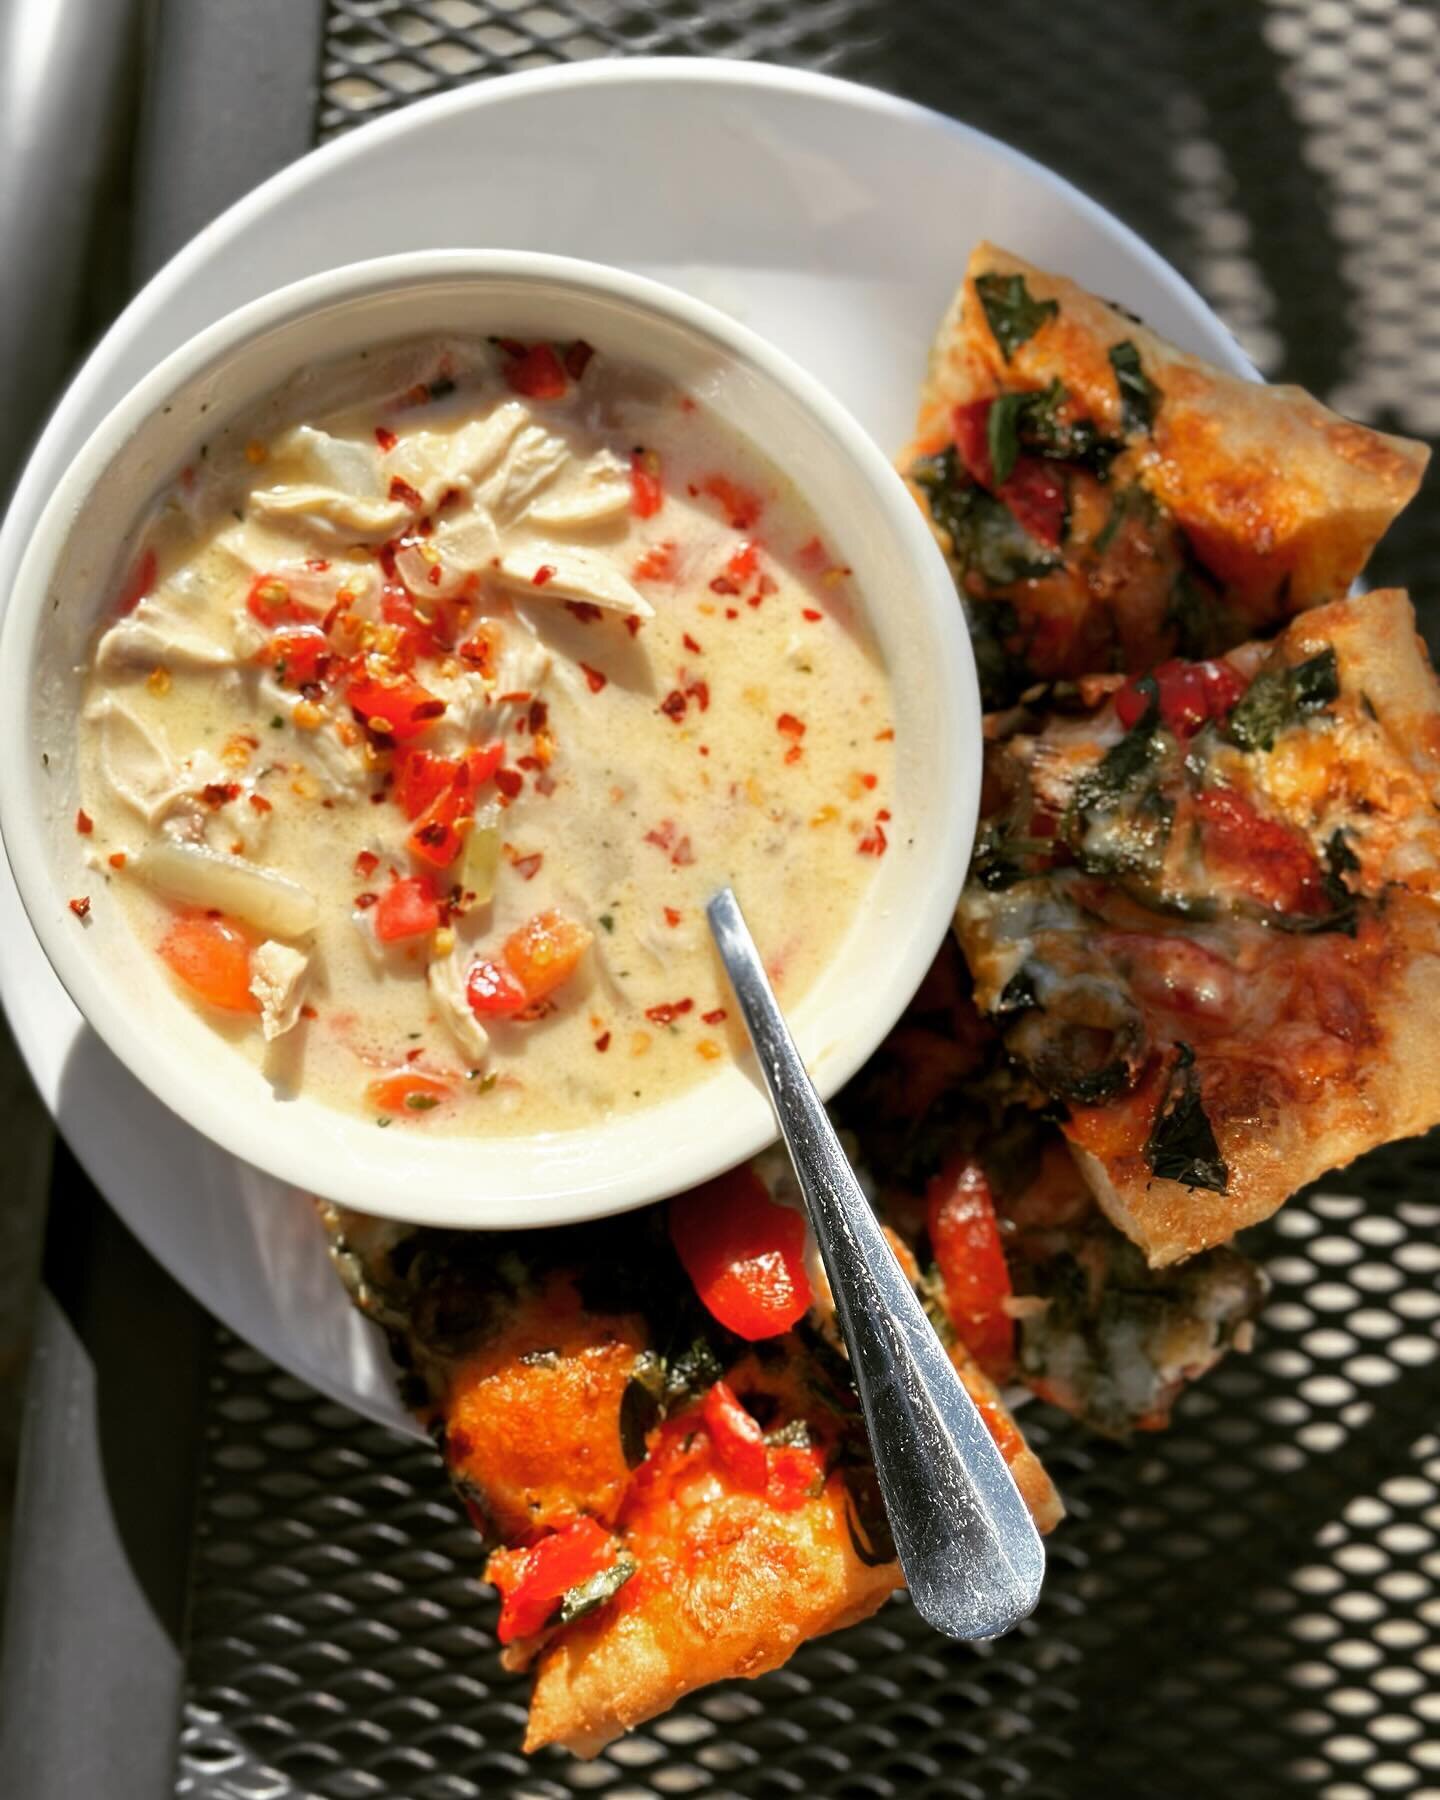 This is our chicken and potato chowder with roasted red peppers and a slice of our house-made pan pizza. It&rsquo;s finally nice enough to eat outside again. Still a bit on the cold side but we have plenty of hot items to choose from to help warm you